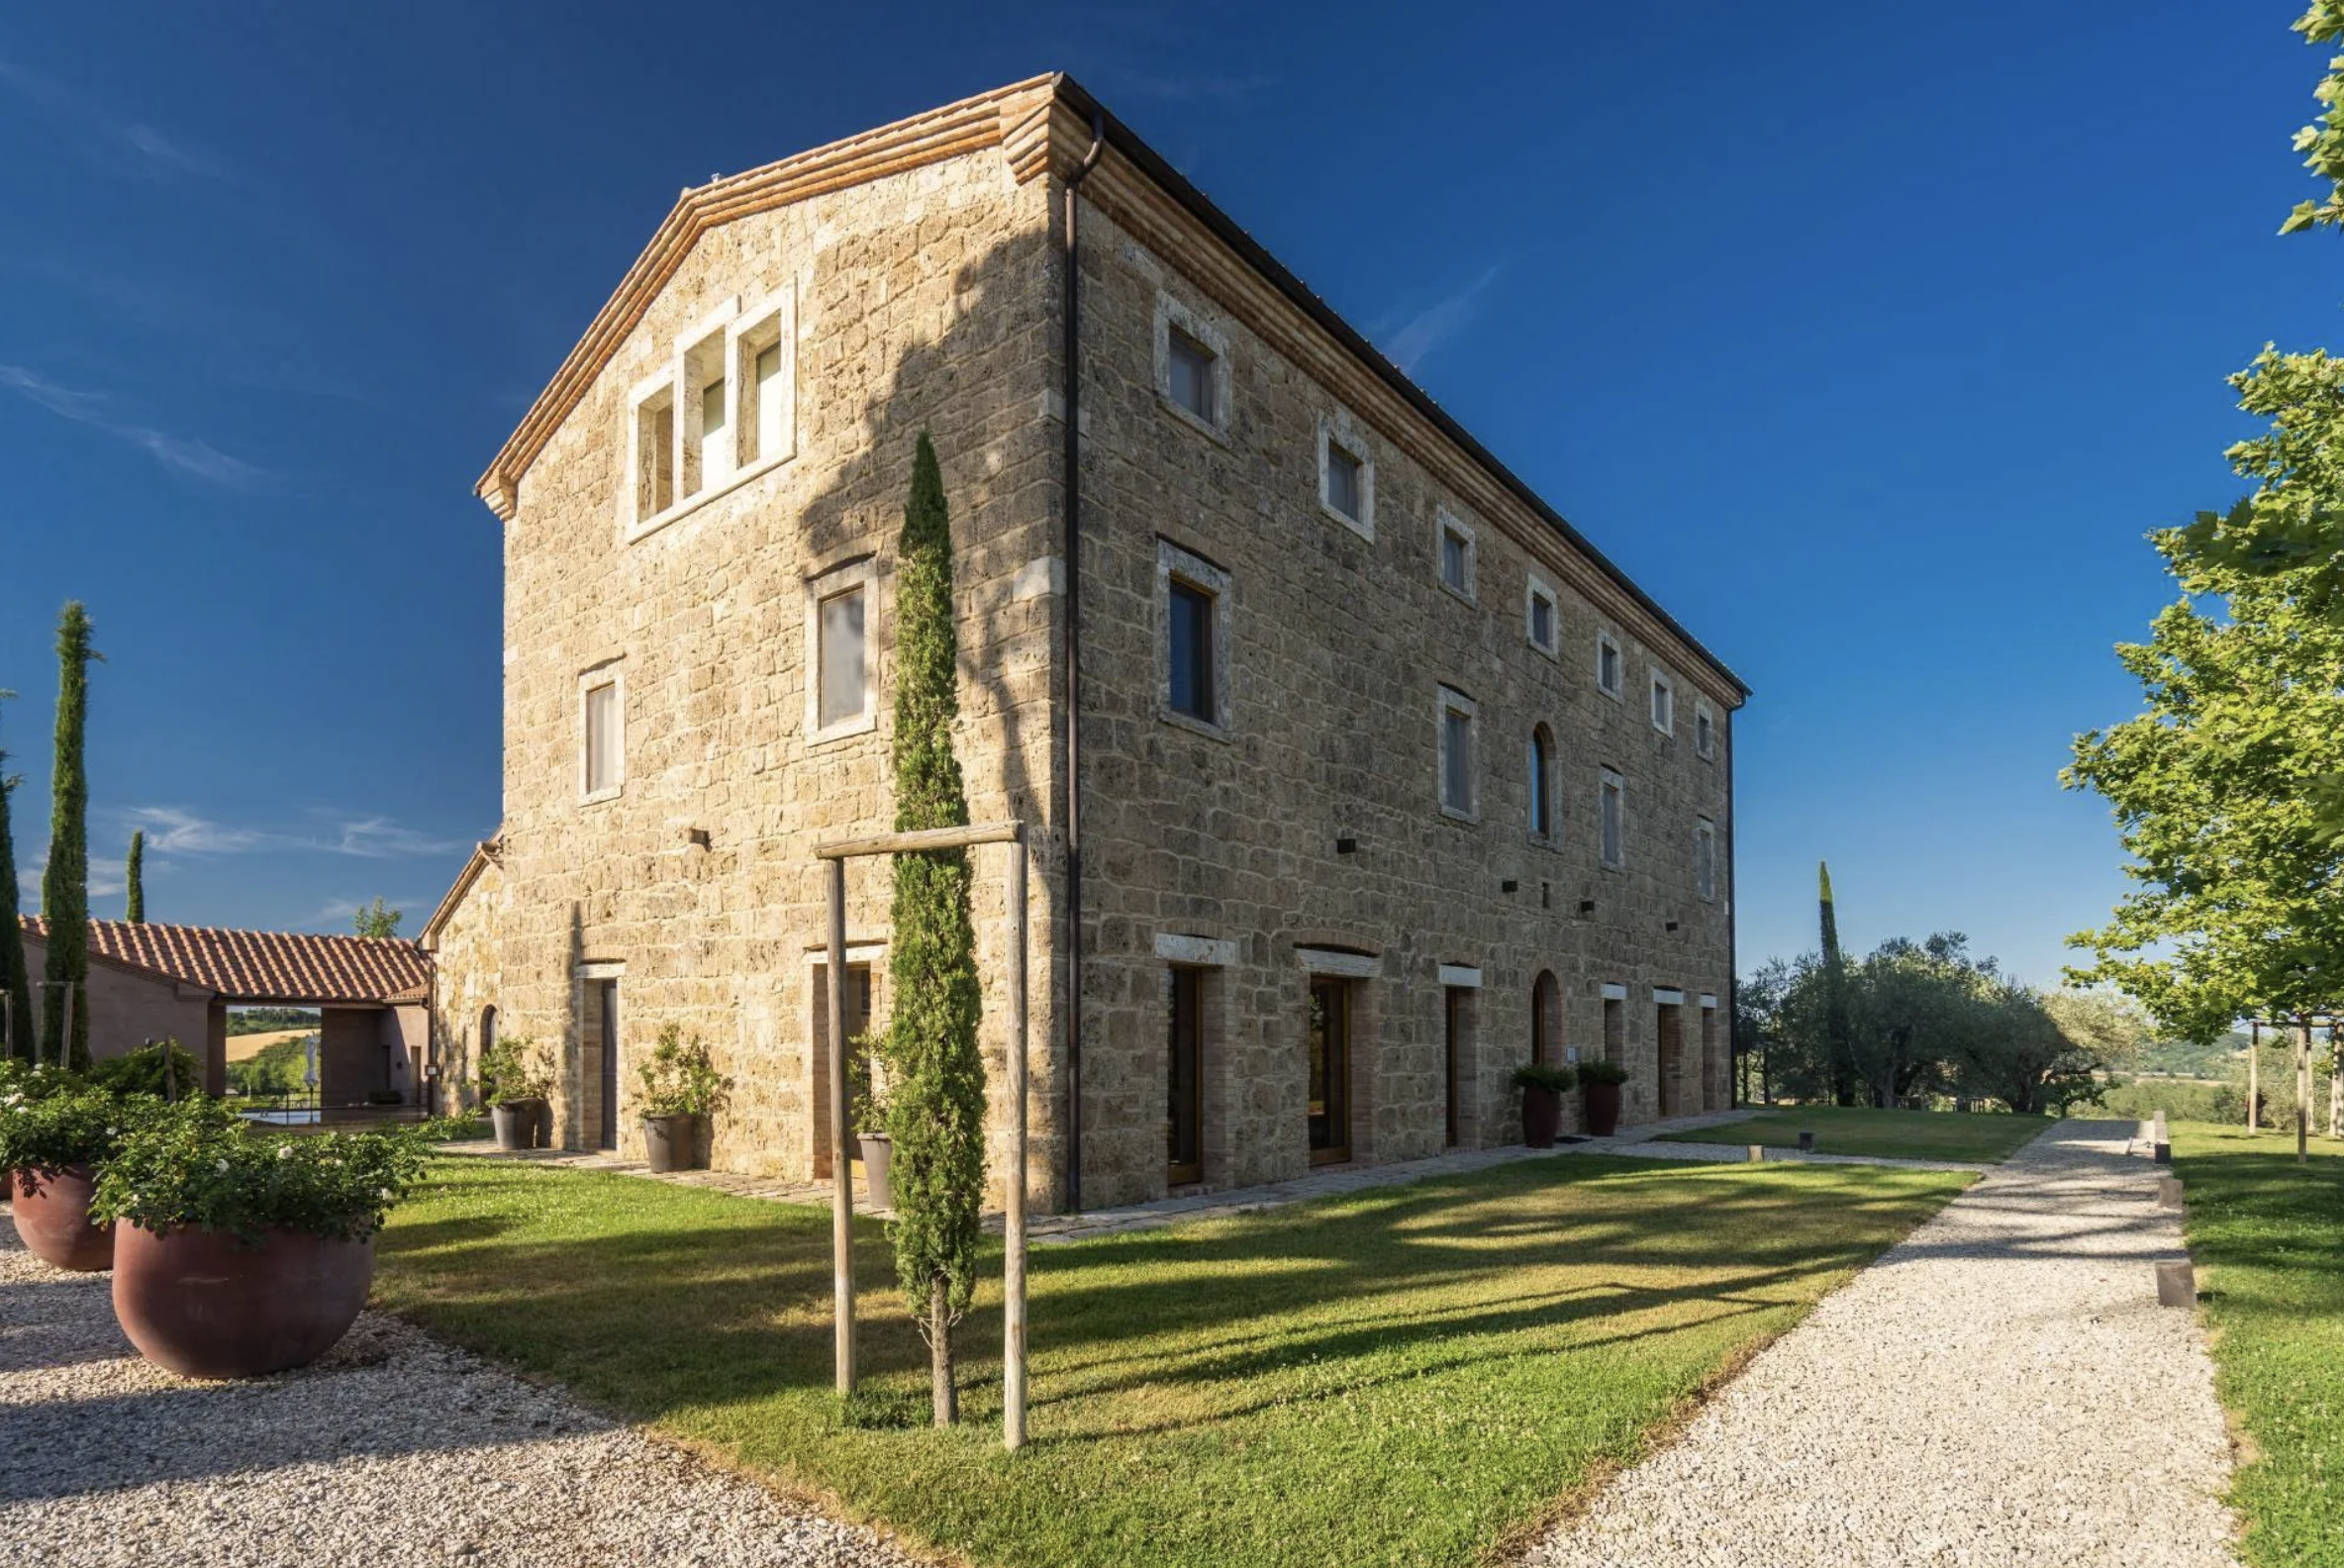 Francis York Villa Travertino: Luxury Villa and Wine Estate in the Heart of Tuscany 7.png